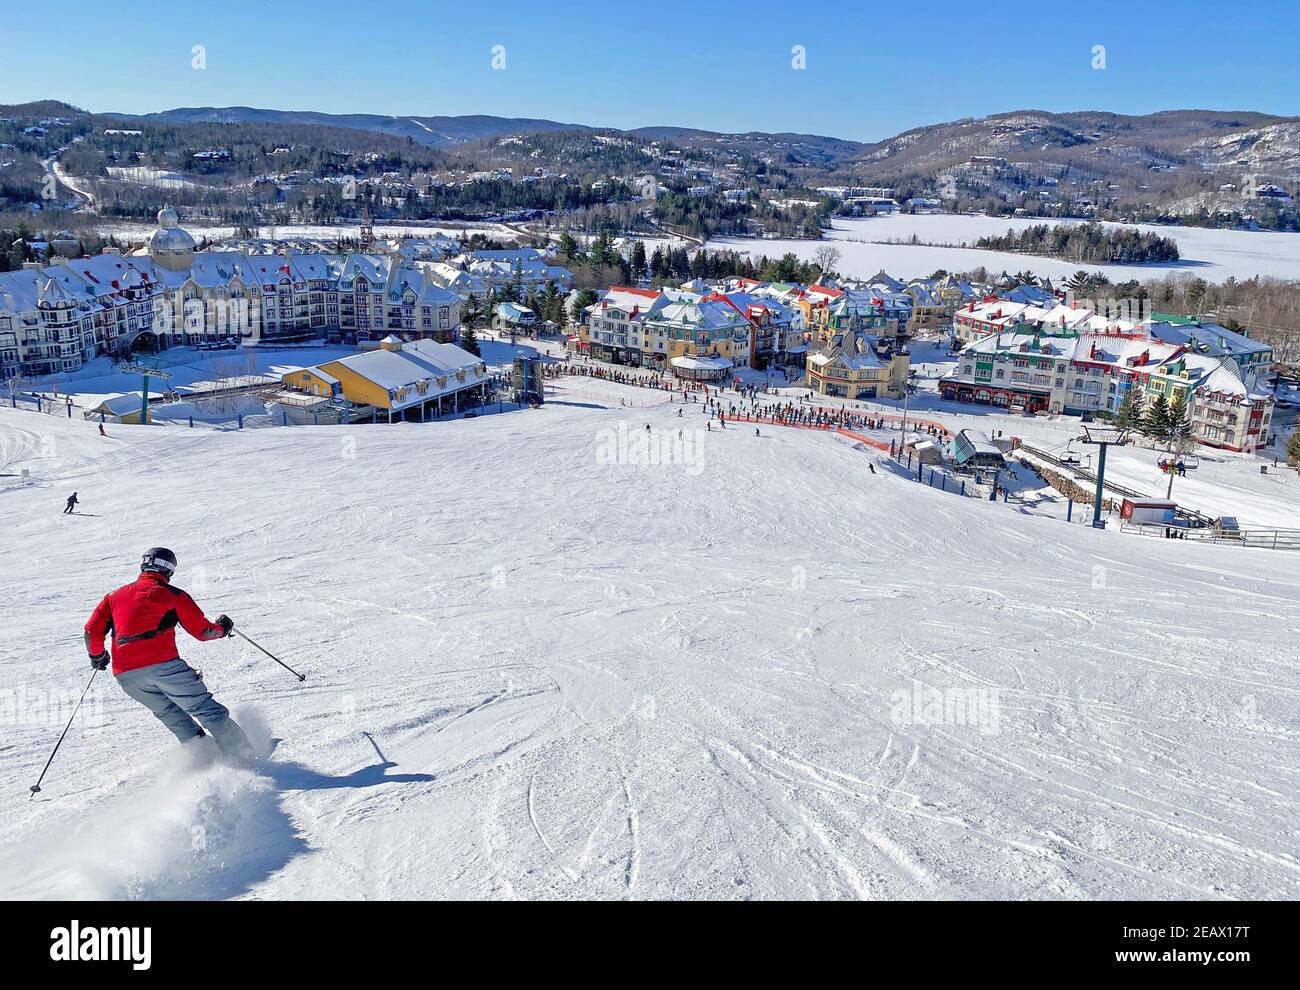 Mont and Lake Tremblant village resort in winter, Quebec, Canada Stock Photo